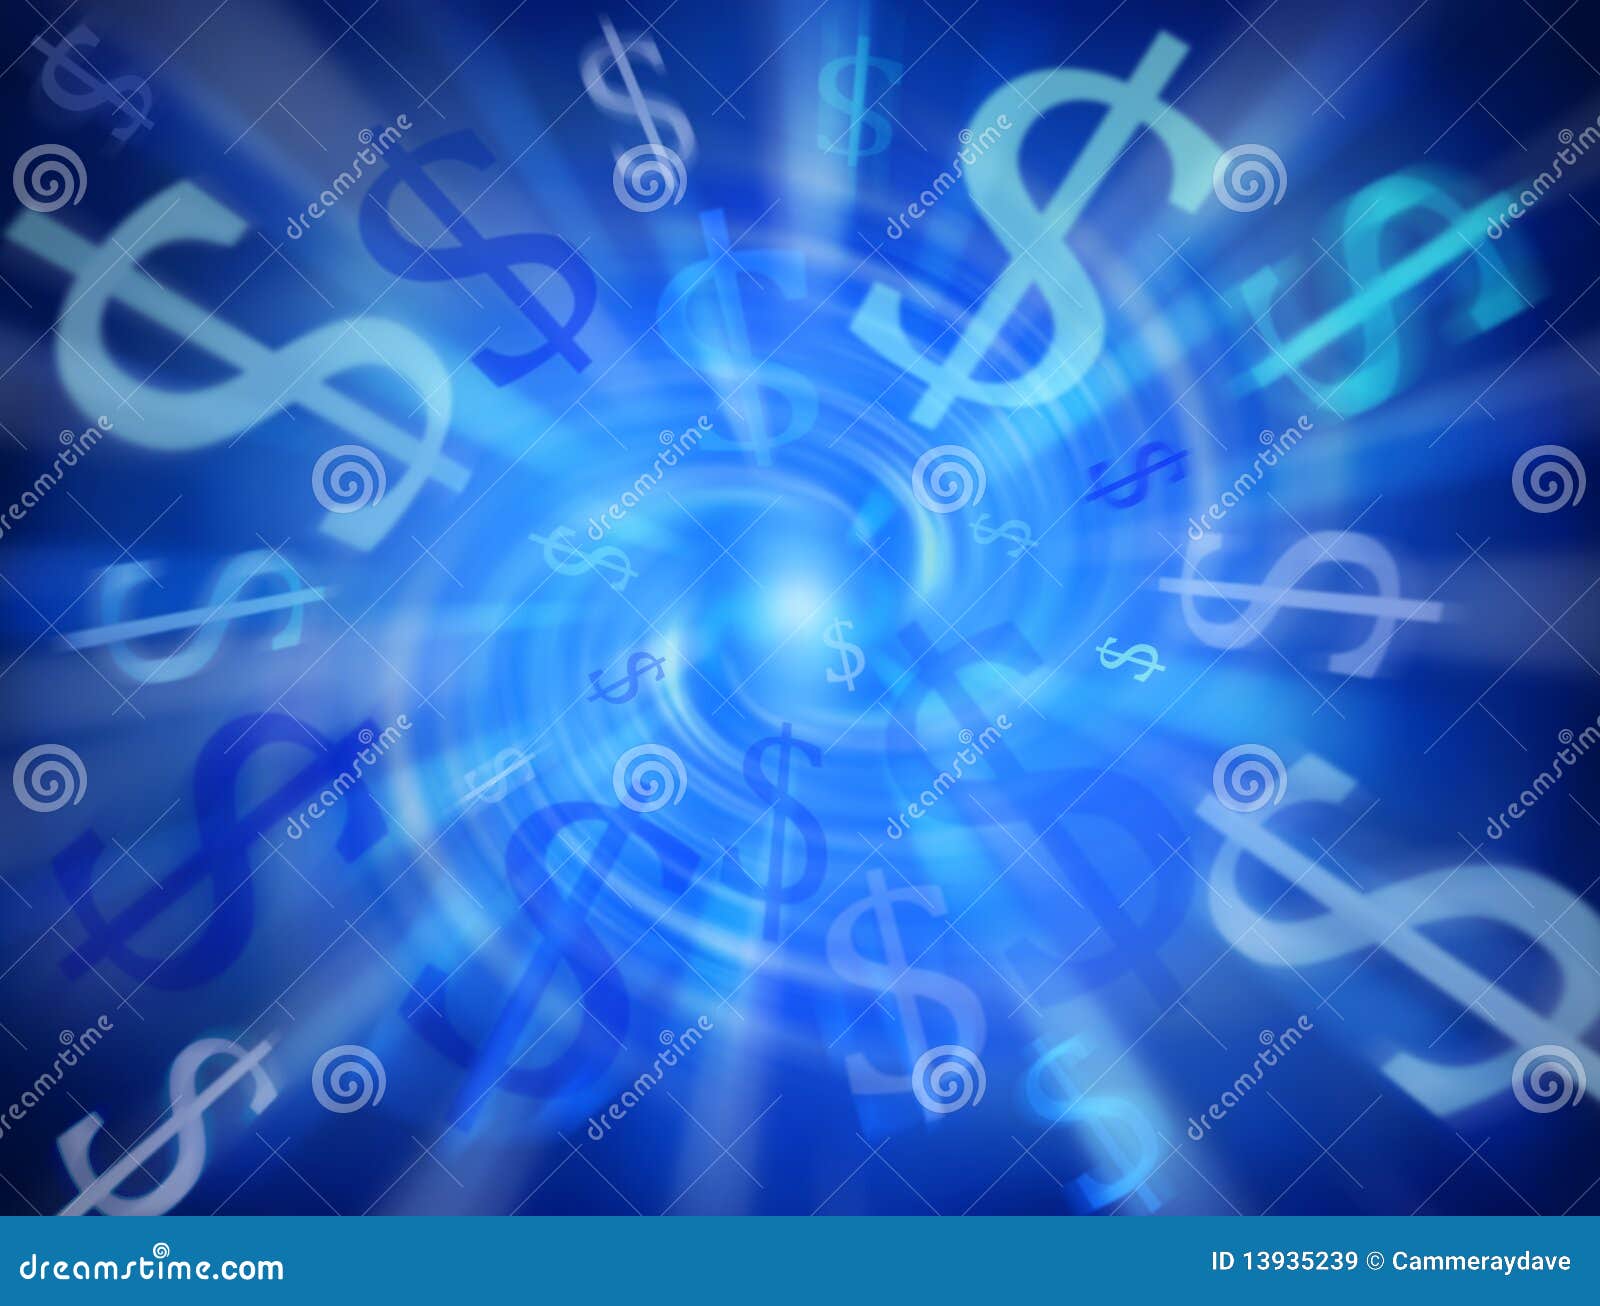 abstract money dollar background